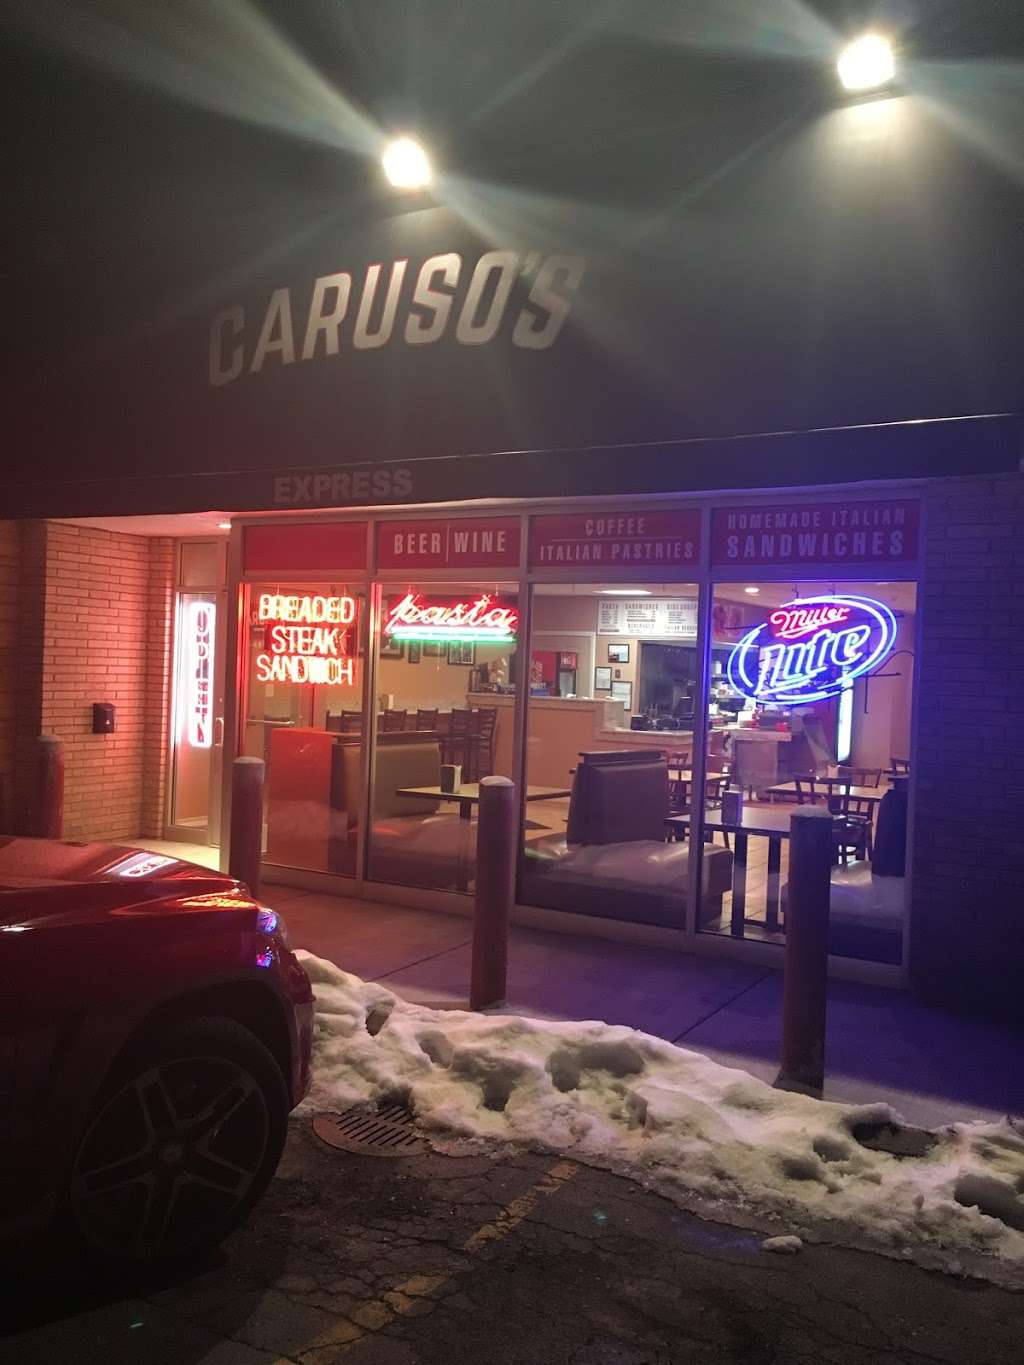 Carusos Express | 1807 S Wolf Rd, Hillside, IL 60162 | Phone: (708) 401-5667